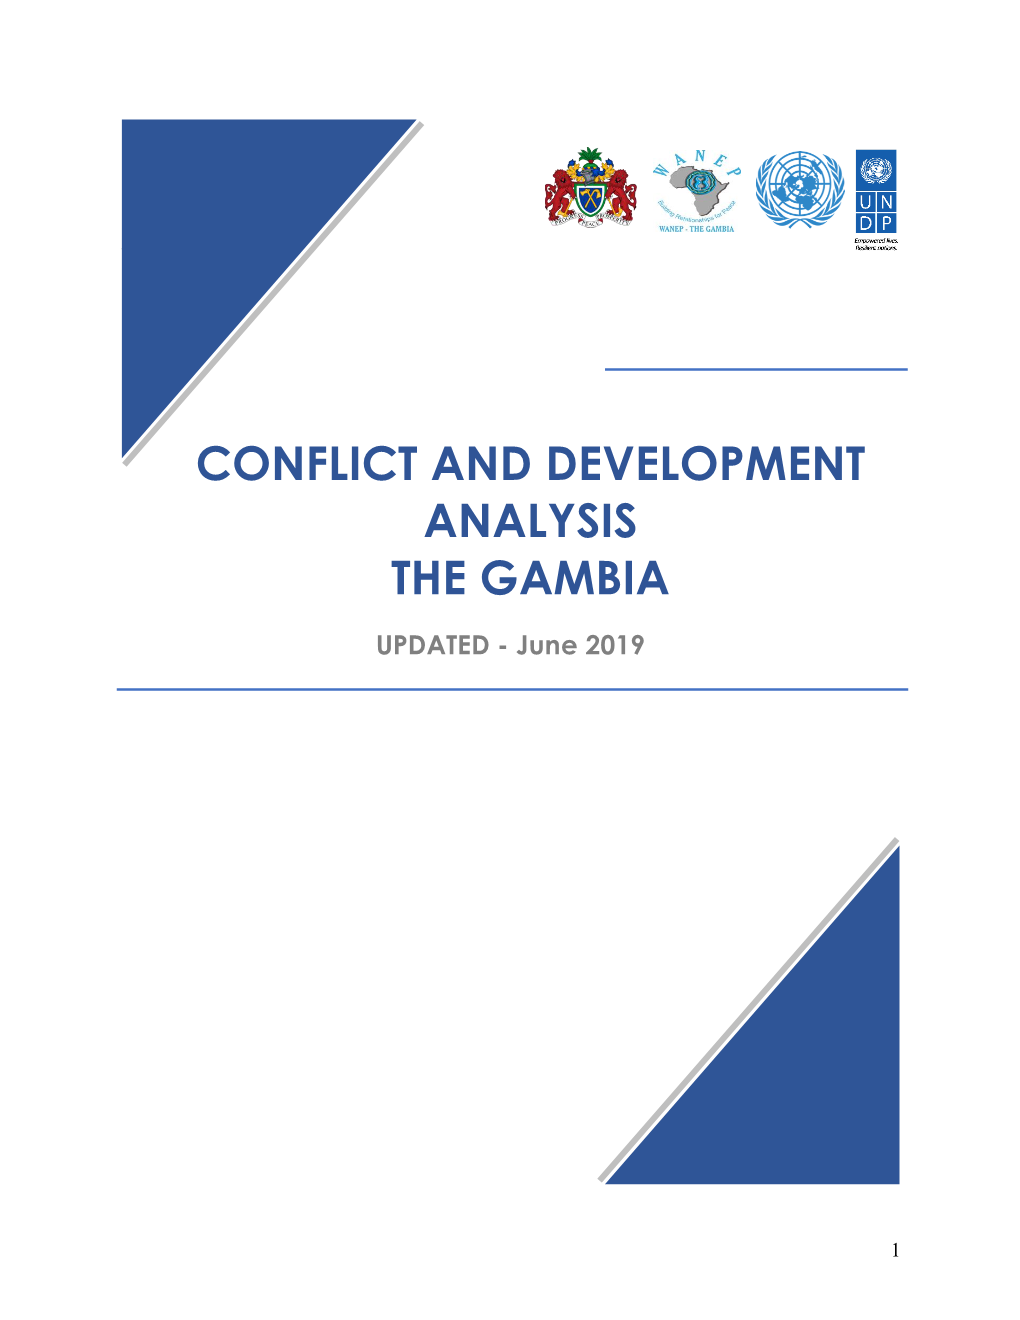 The Conflict and Development Analysis (CDA) Updated Report Was a Collaborative Effort Between the Government Of